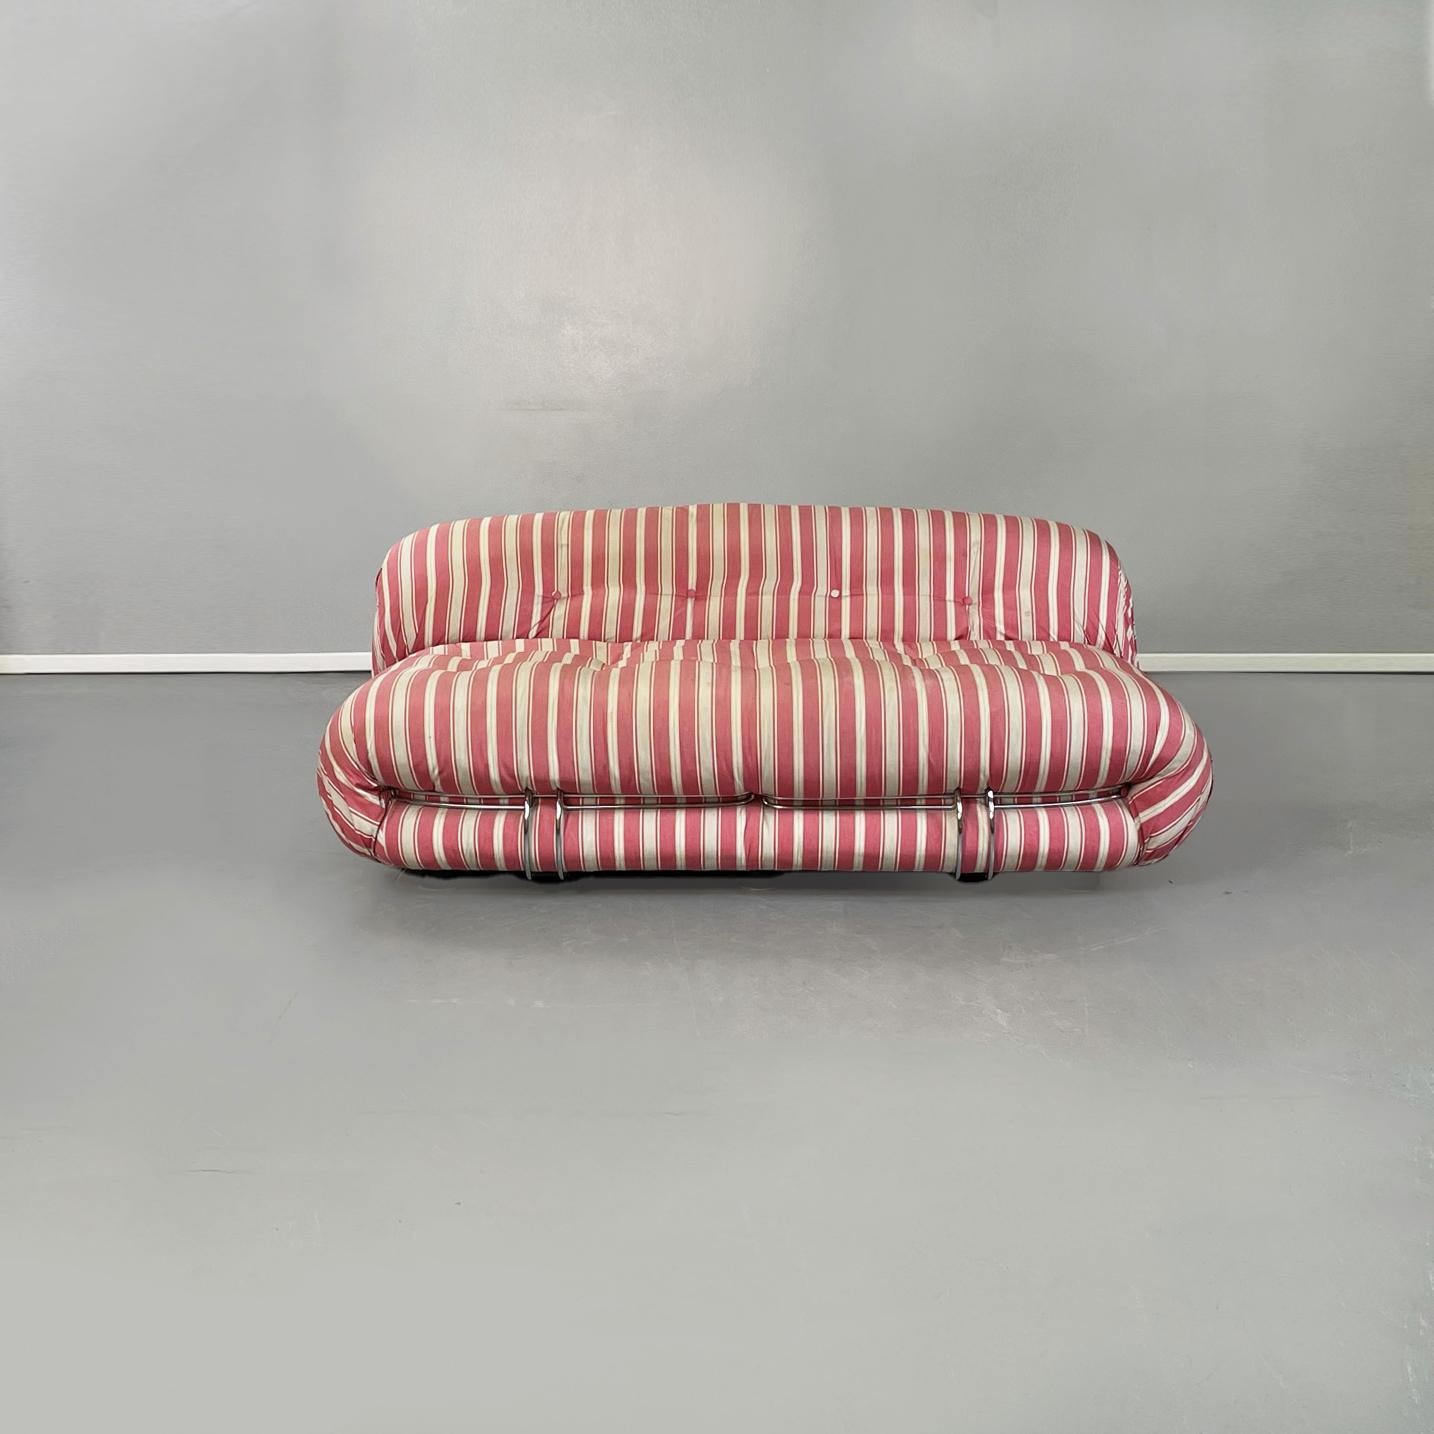 Italian mid-century Pink and white fabric and steel Soriana sofa by Afra and Tobia Scarpa for Cassina, 1970s
Soriana sofa with padding contained by elements in chromed steel rod and upholstery in pink and white striped fabric.
Produced by Cassina in